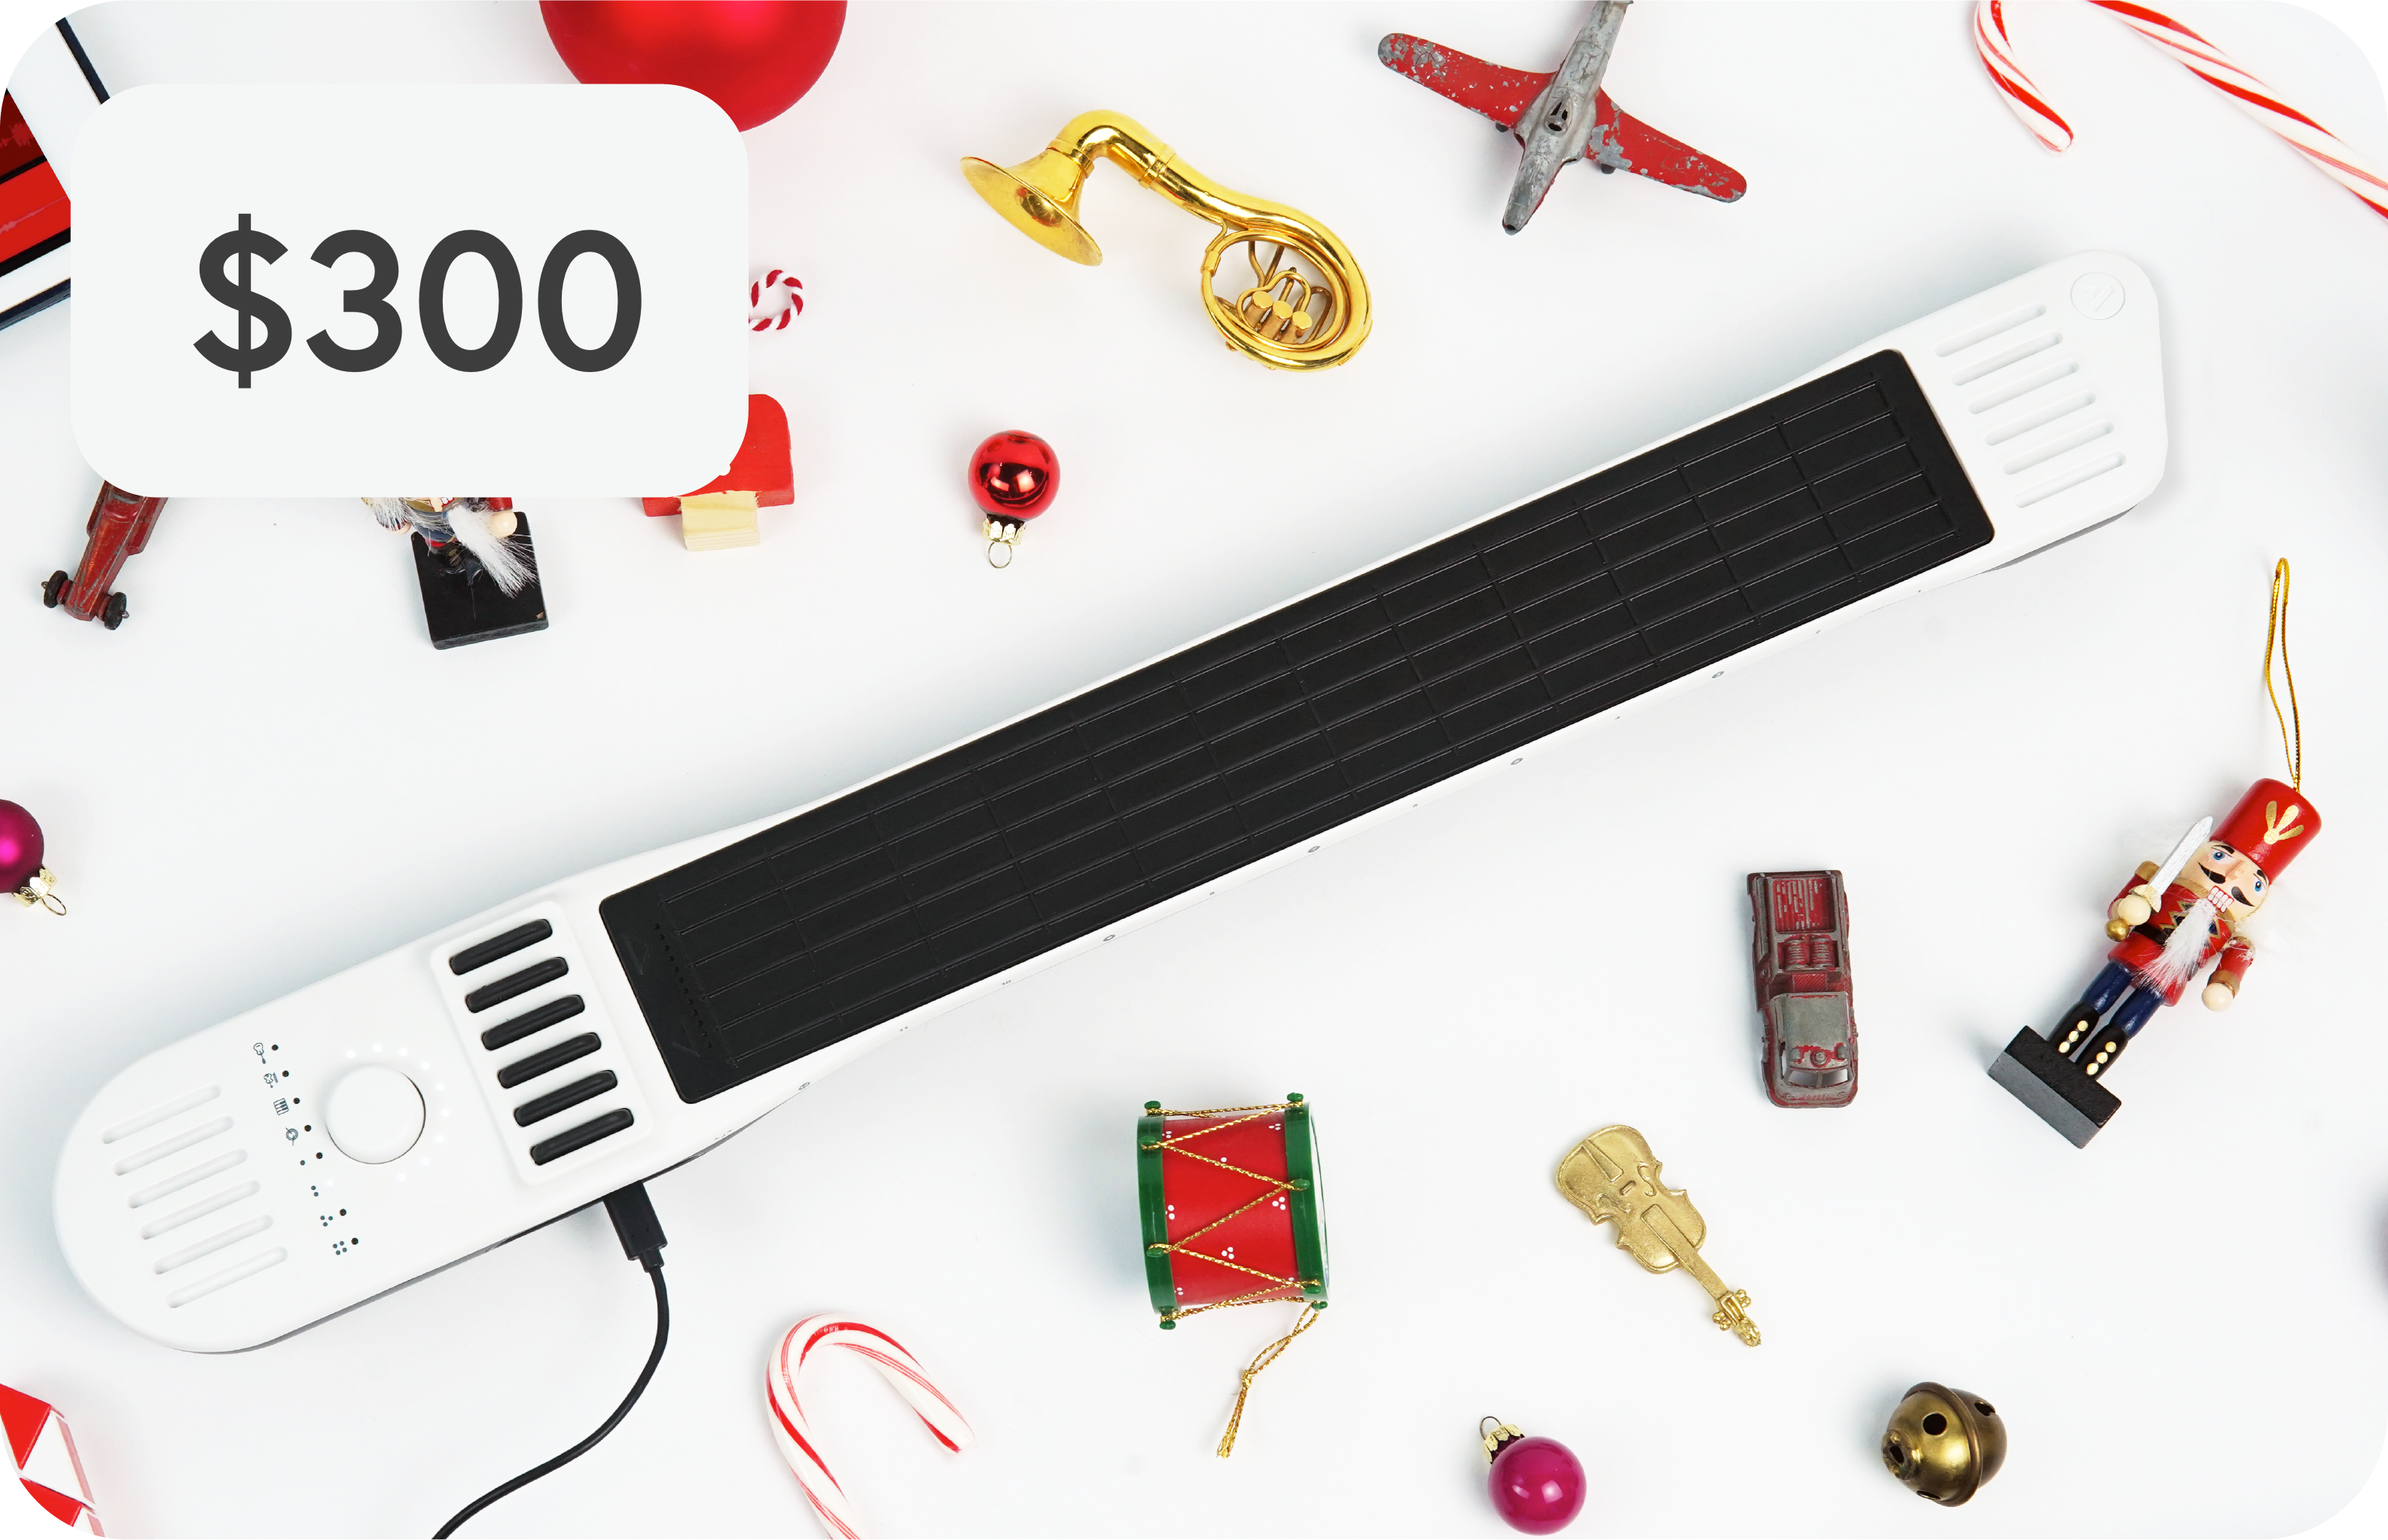 Artiphon $300 Gift Card with Christmas toys and INSTRUMENT 1